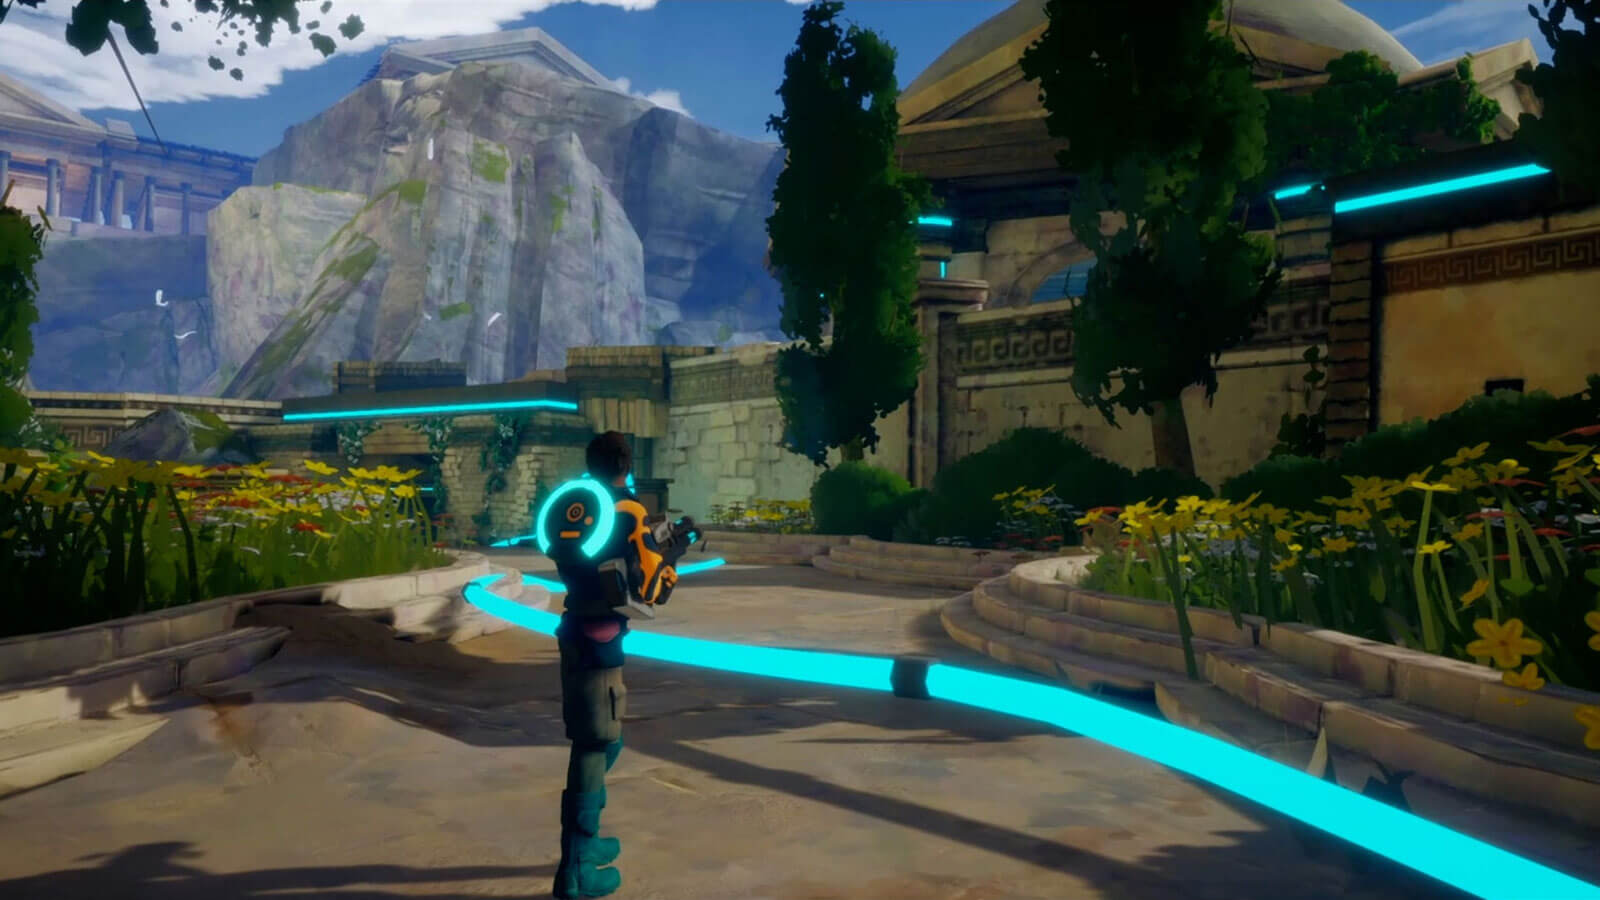 A human character holds a gun and stands in a large outdoor garden area with roman-like architecture.